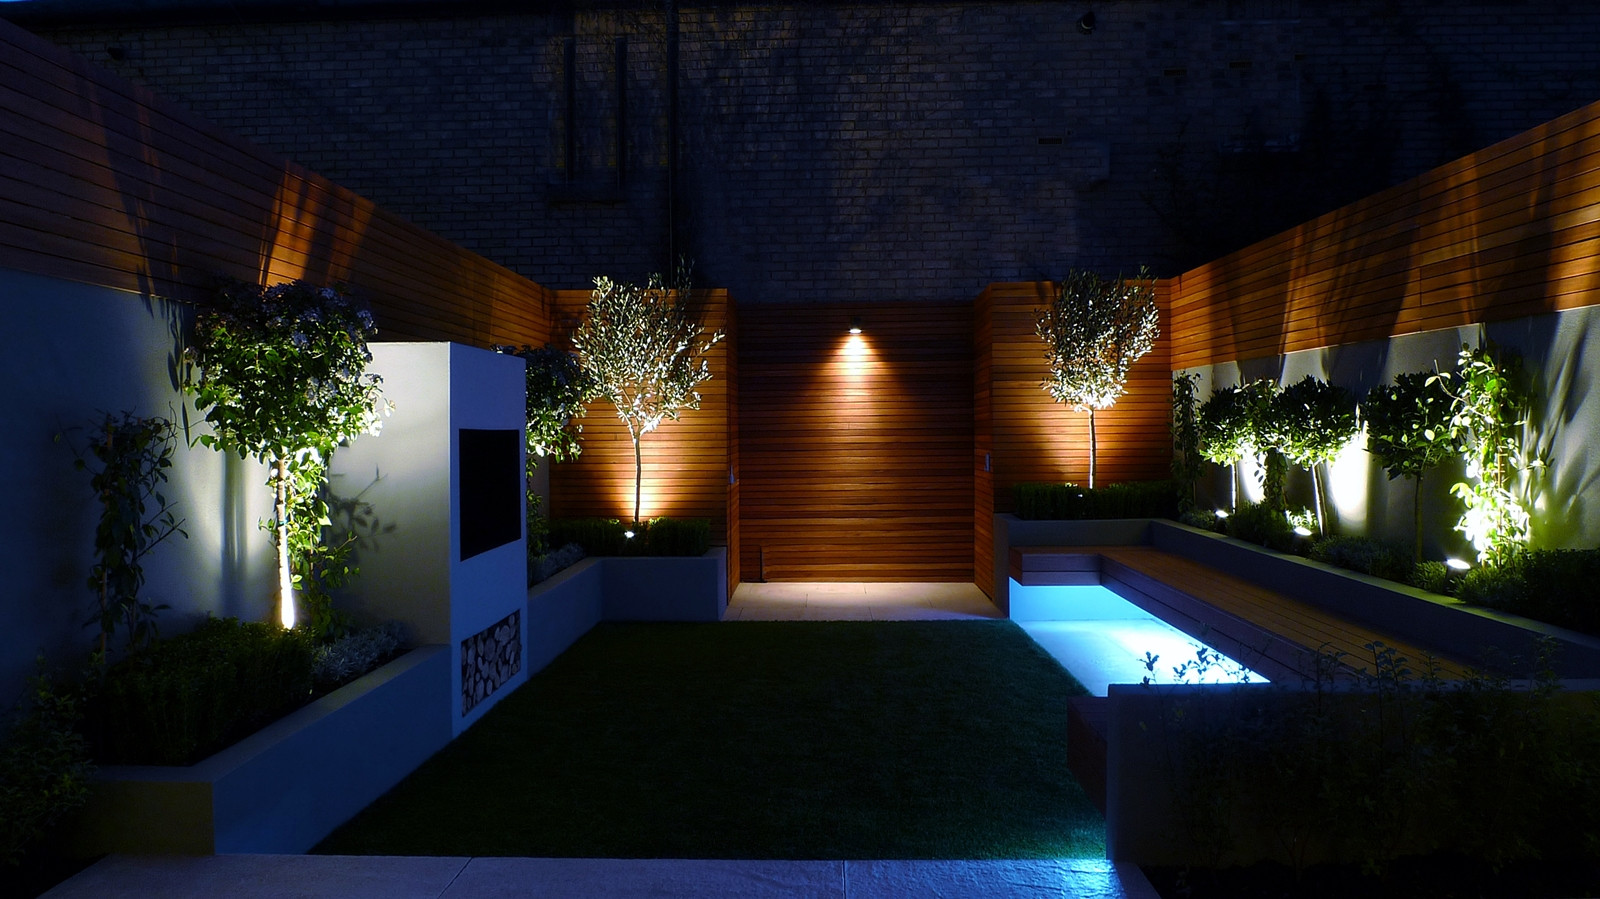 Exterior Landscape Lighting
 Making Sure Your Outdoor Illumination Doesn’t Annoy Your